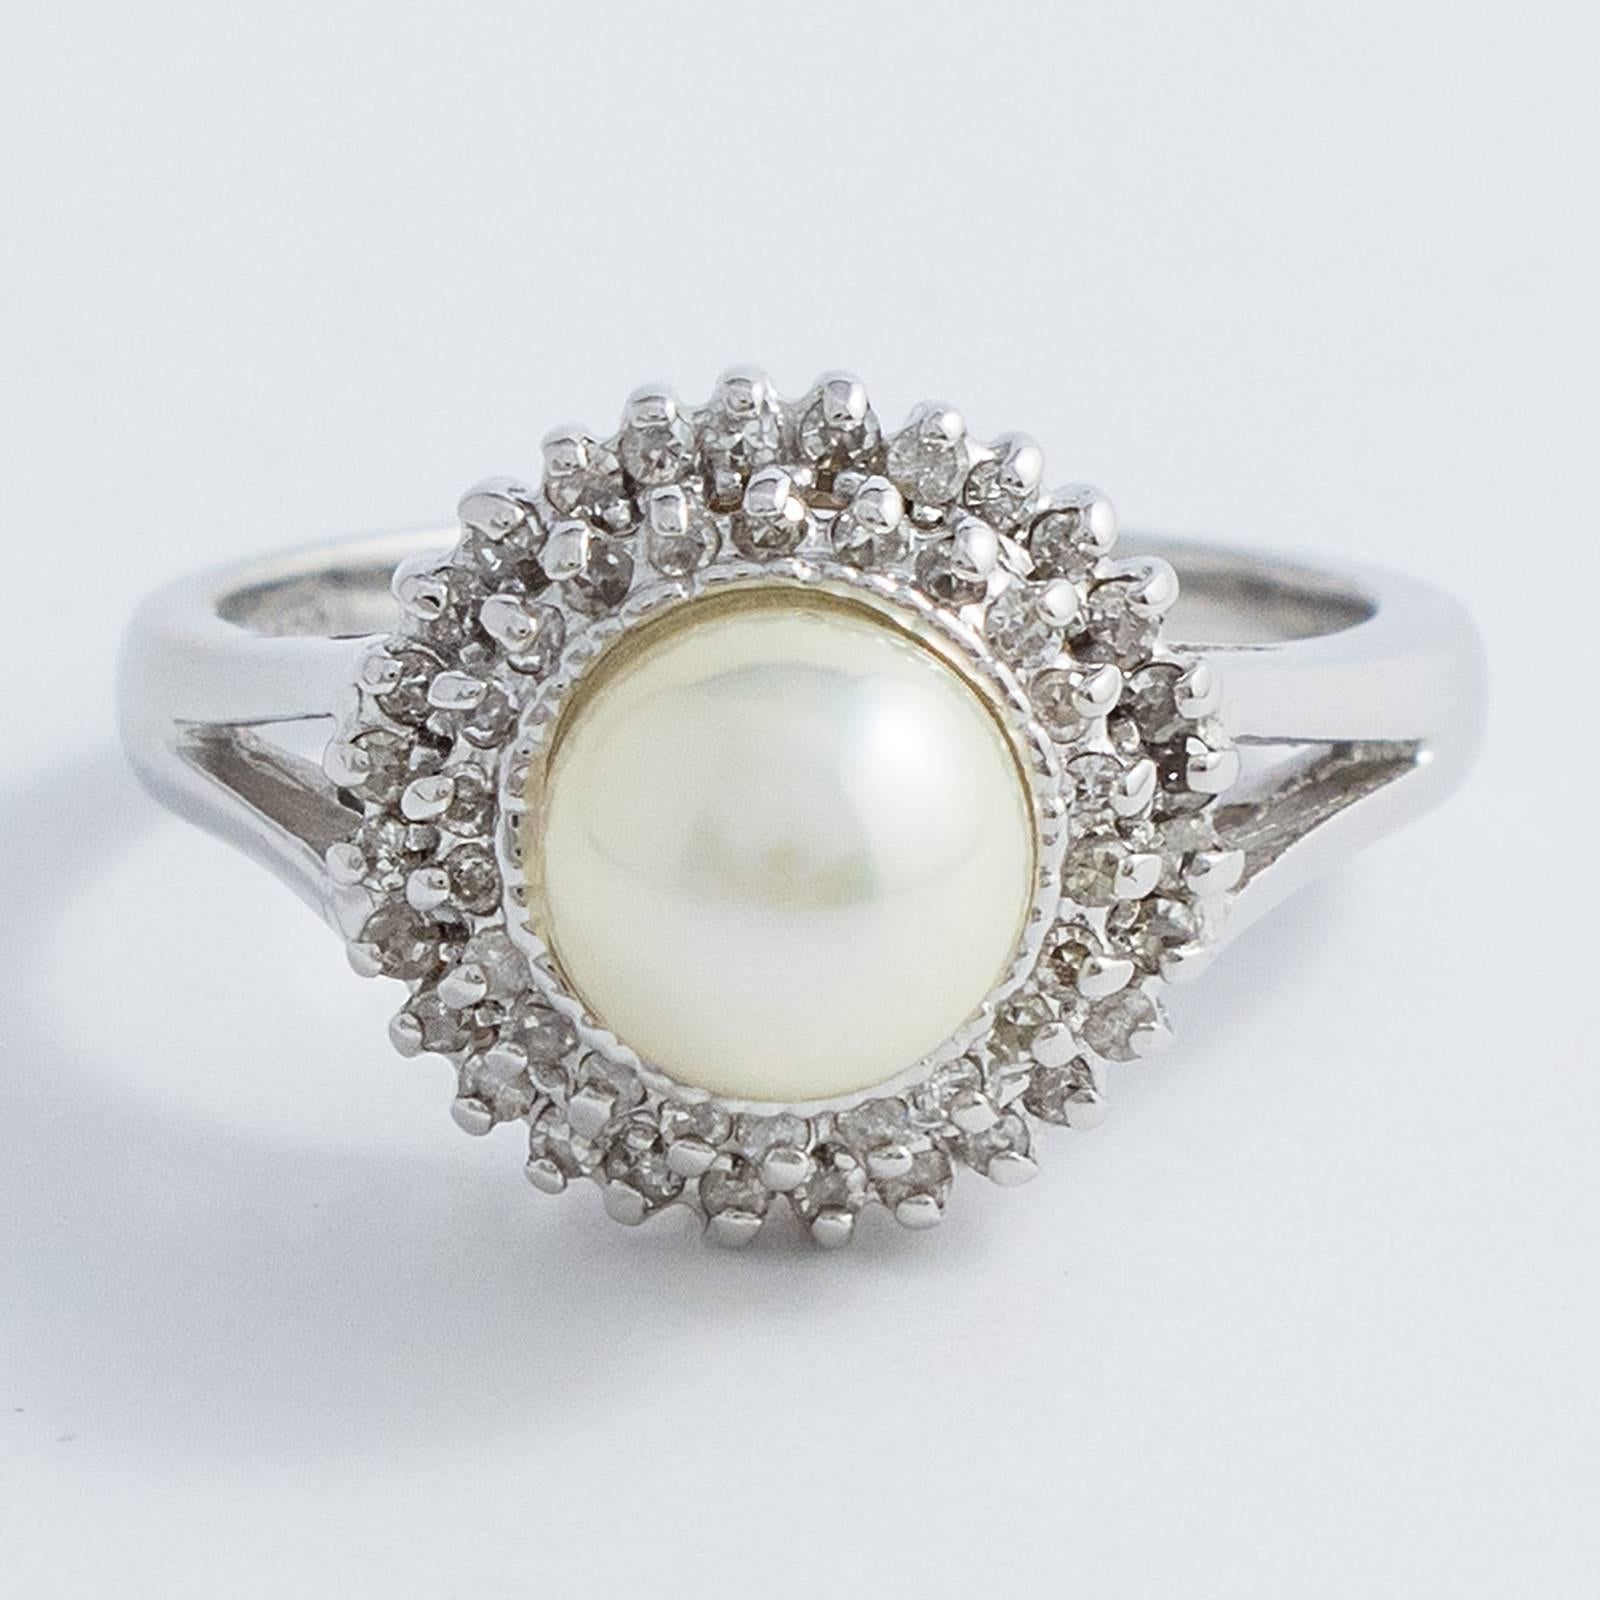 A lovely Akoya Pearl and Diamond White Gold Ring. This Japanese Akoya Cultured Pearl is encircled in two stepped rows holding 61 small, Brilliant Cut Diamonds, set in a 14K Gold split shank.

The top of the ring measures approximately 15mm, rising